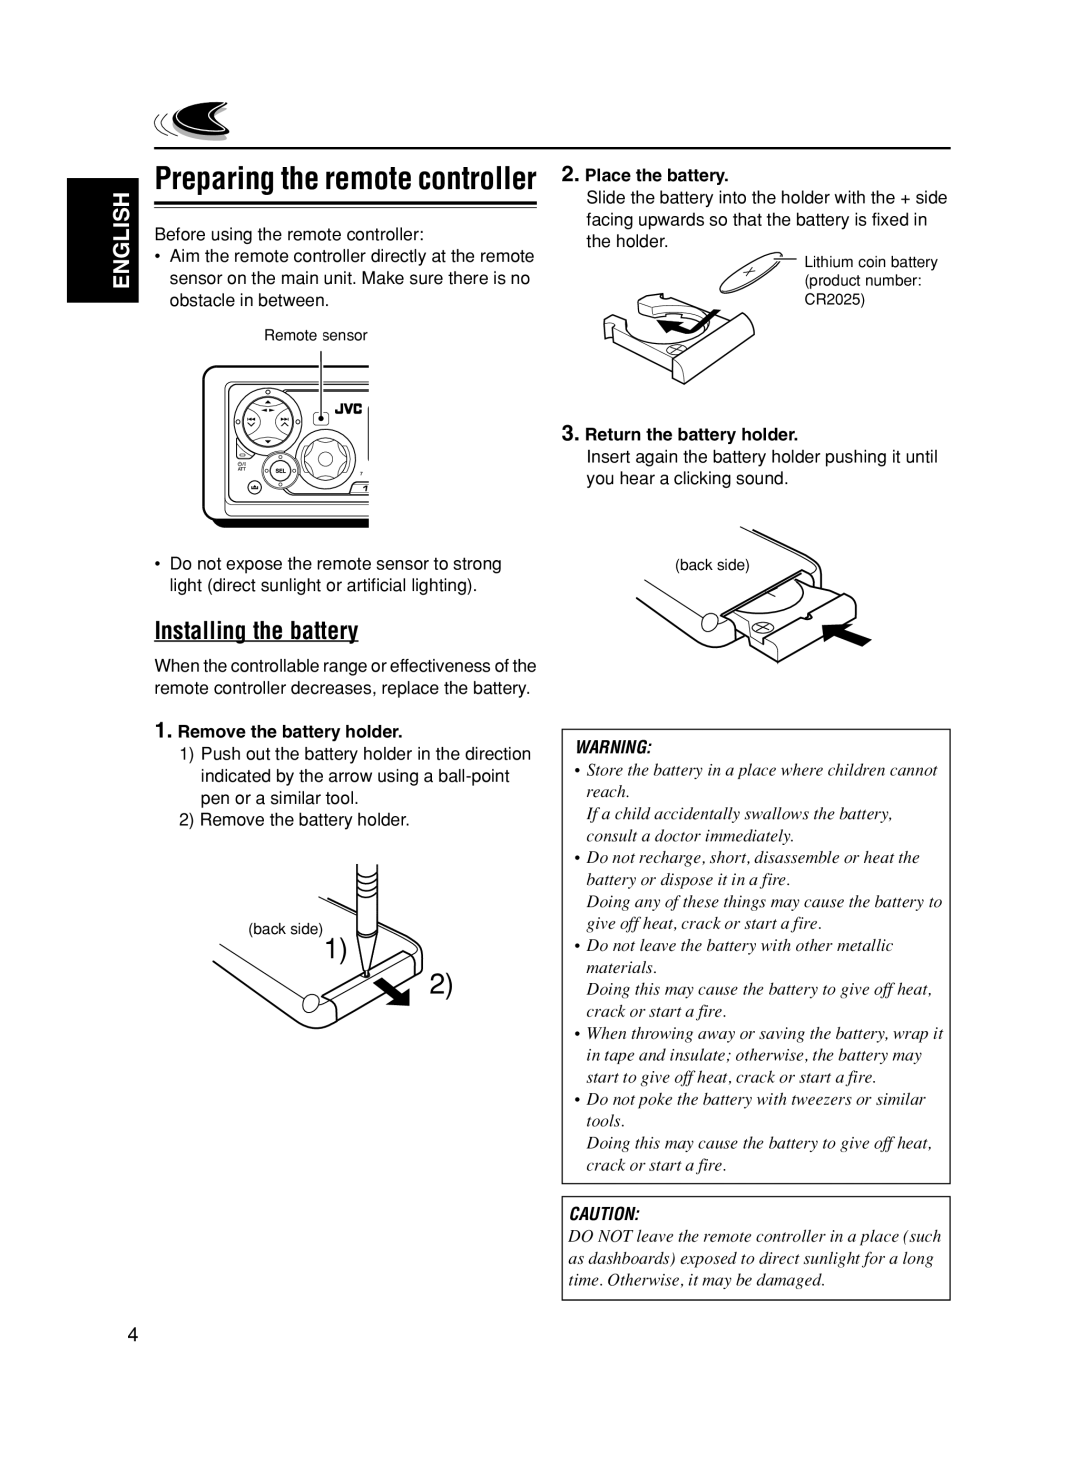 JVC KS-FX490 manual Preparing the remote controller, Installing the battery, English 